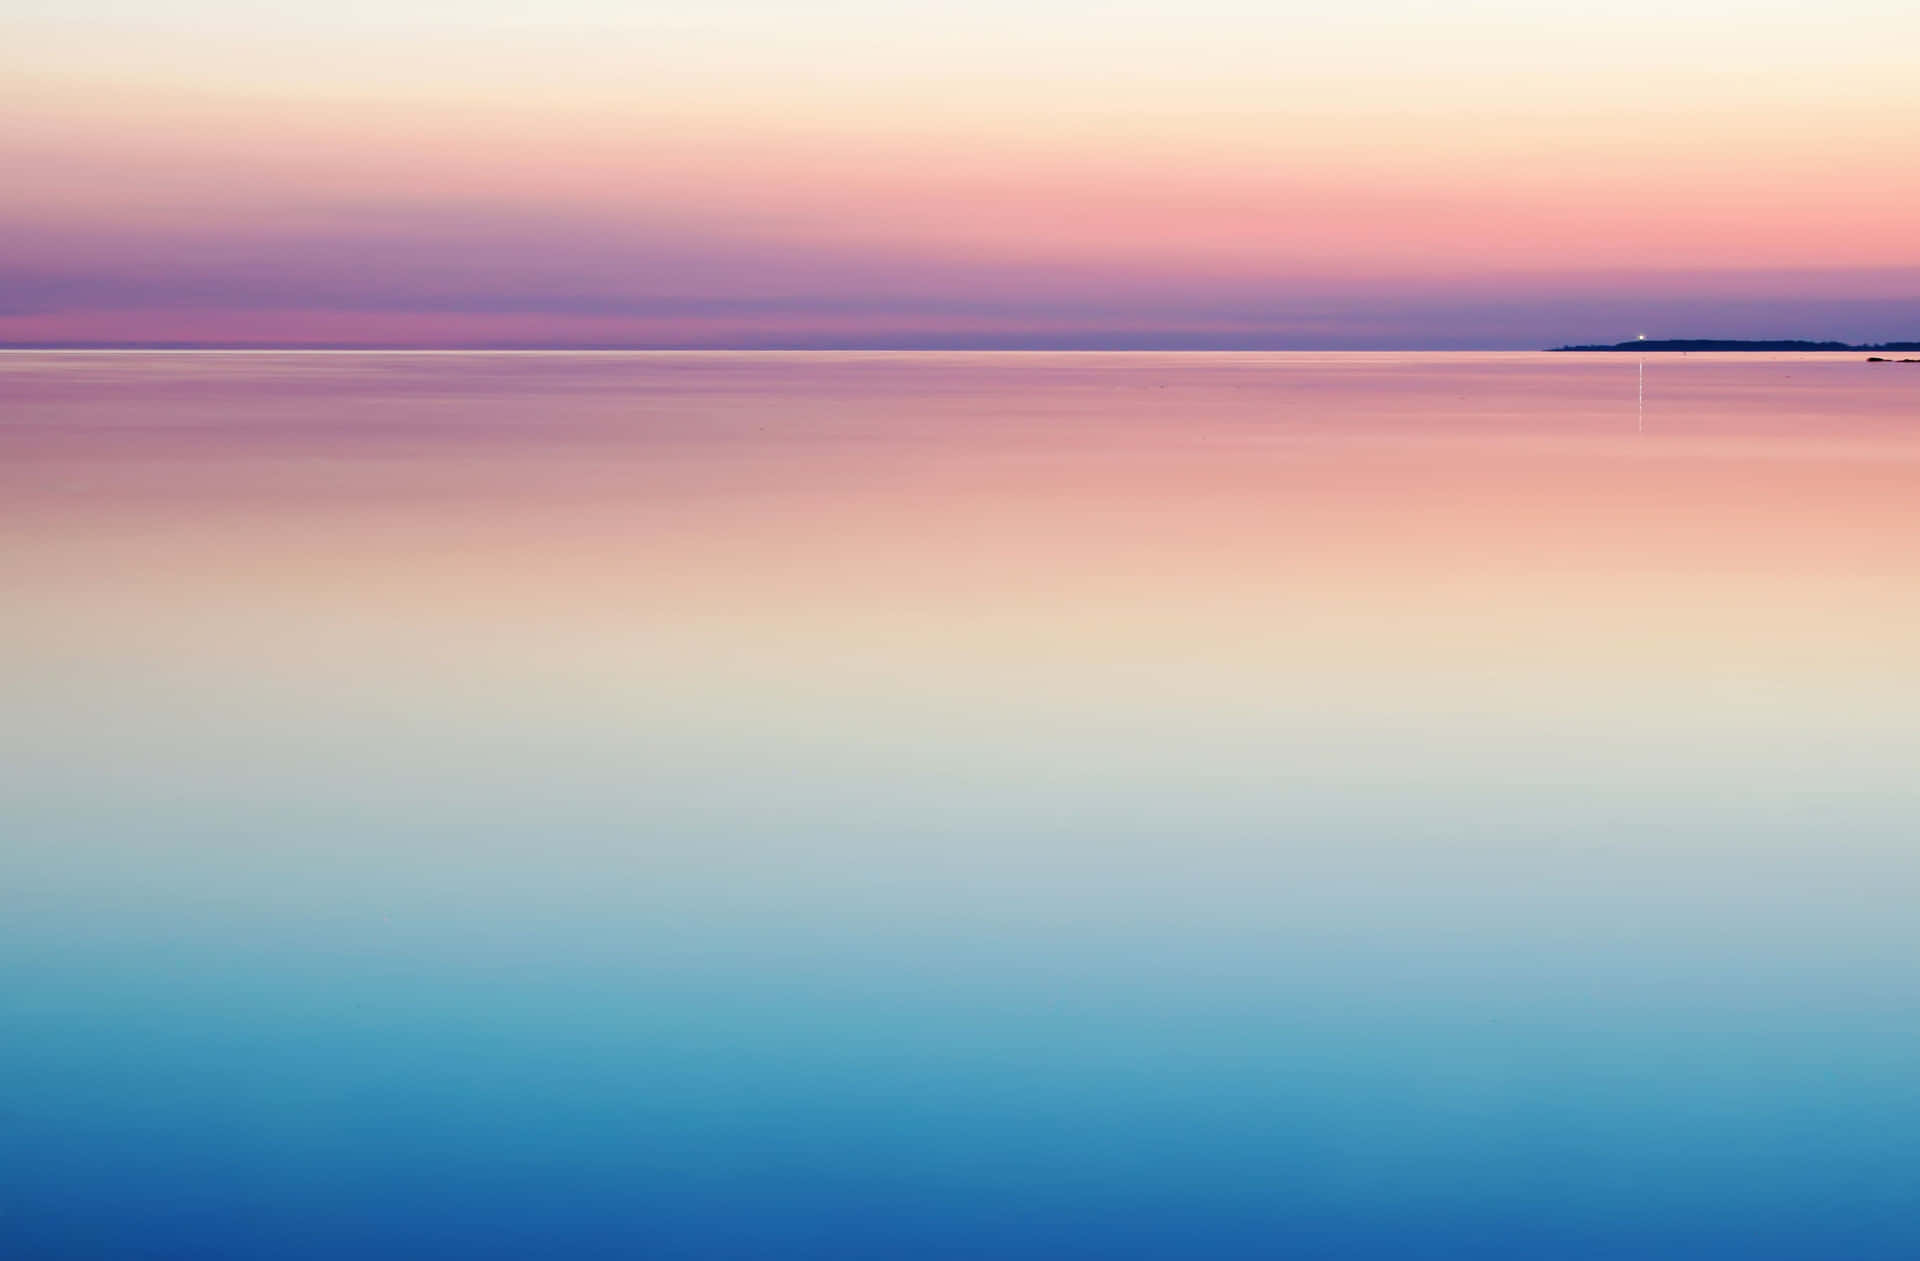 A Sunset Over A Calm Body Of Water Background